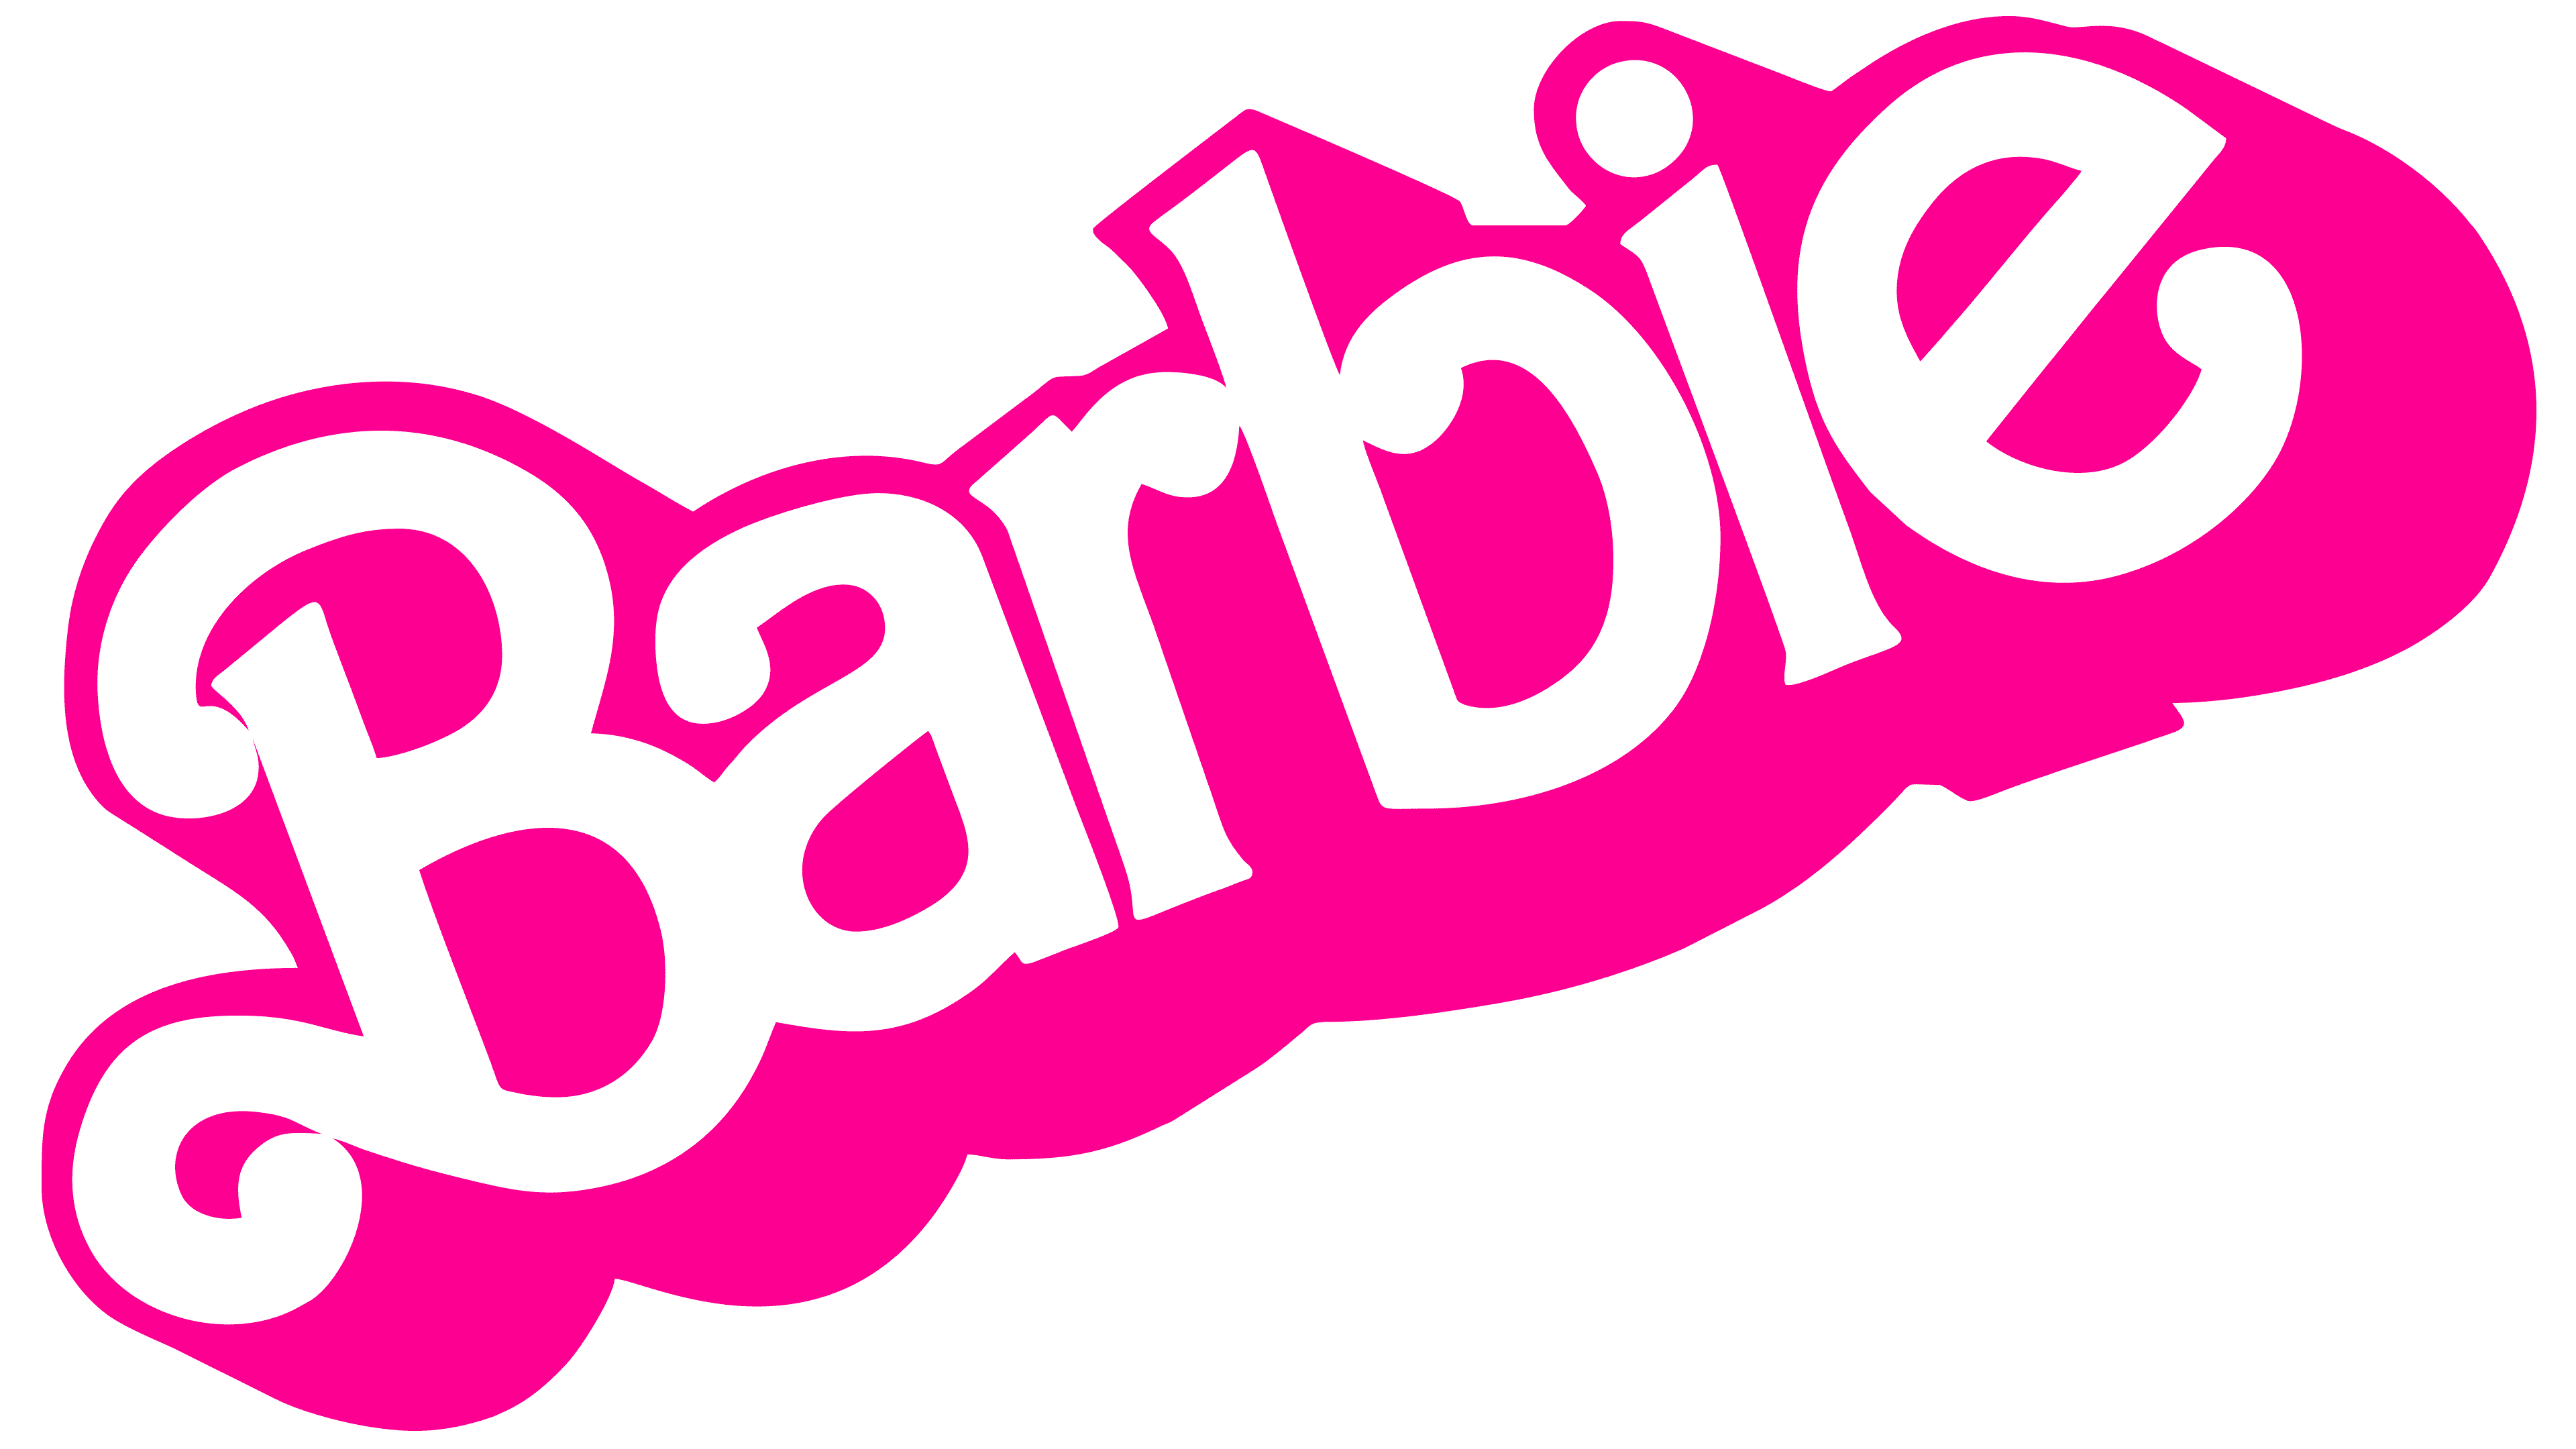 Barbie Logo And Symbol Meaning History Sign